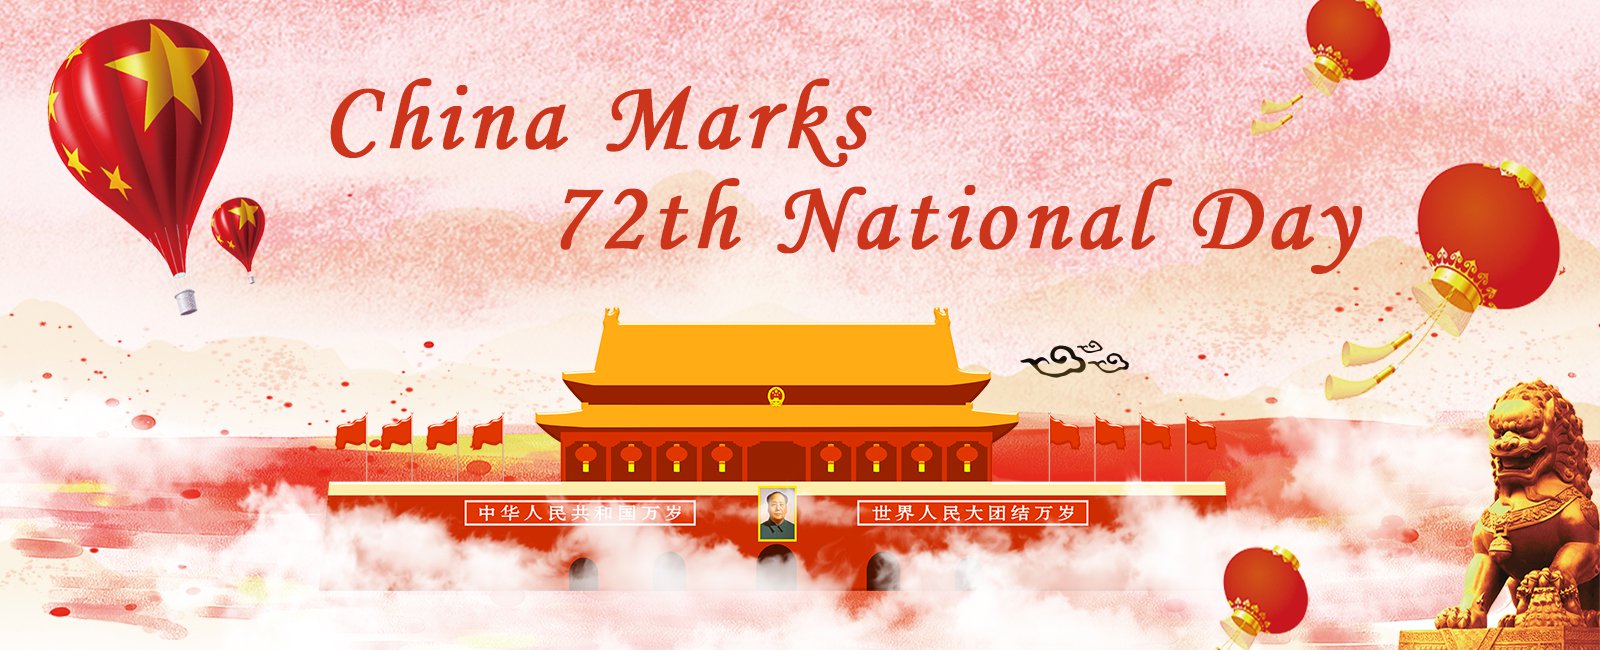 China Marks 72th National Day